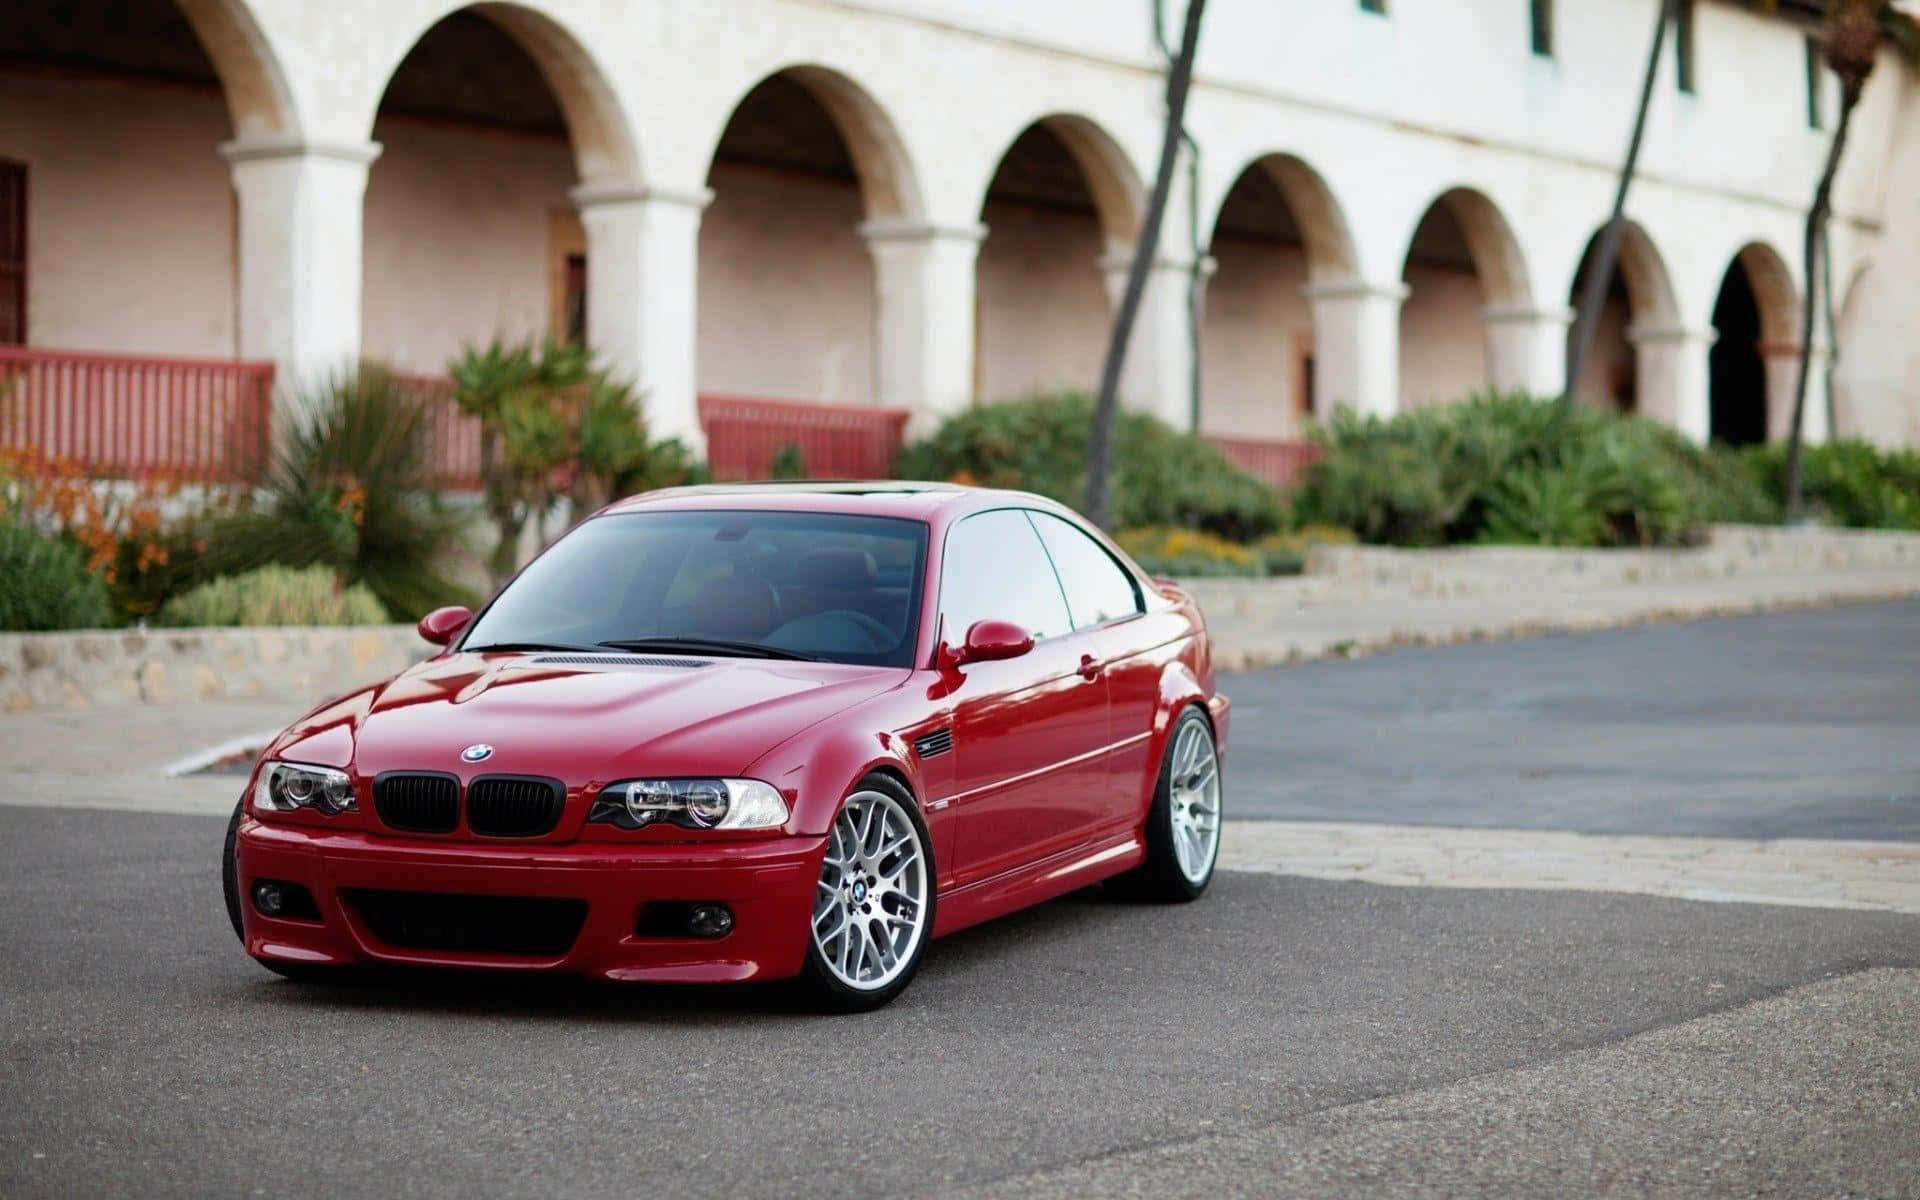 Red B M W E46 M3 Coupe Exterior Wallpaper